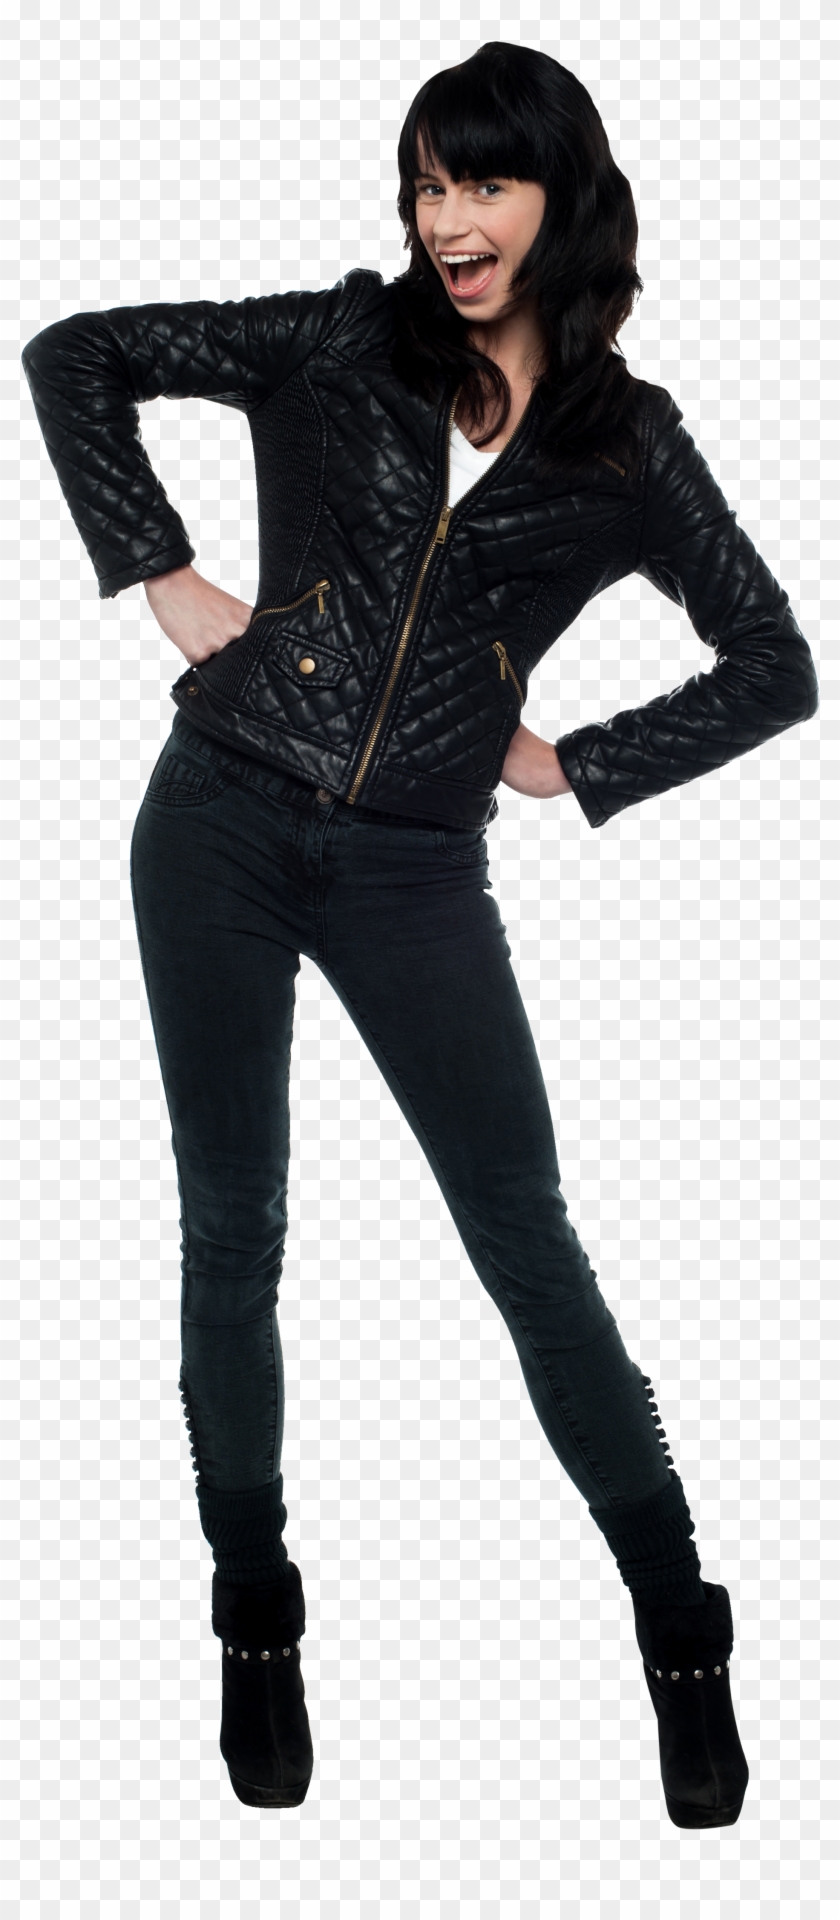 Fashion Girl - Girl With Jacket Png Clipart #1046663